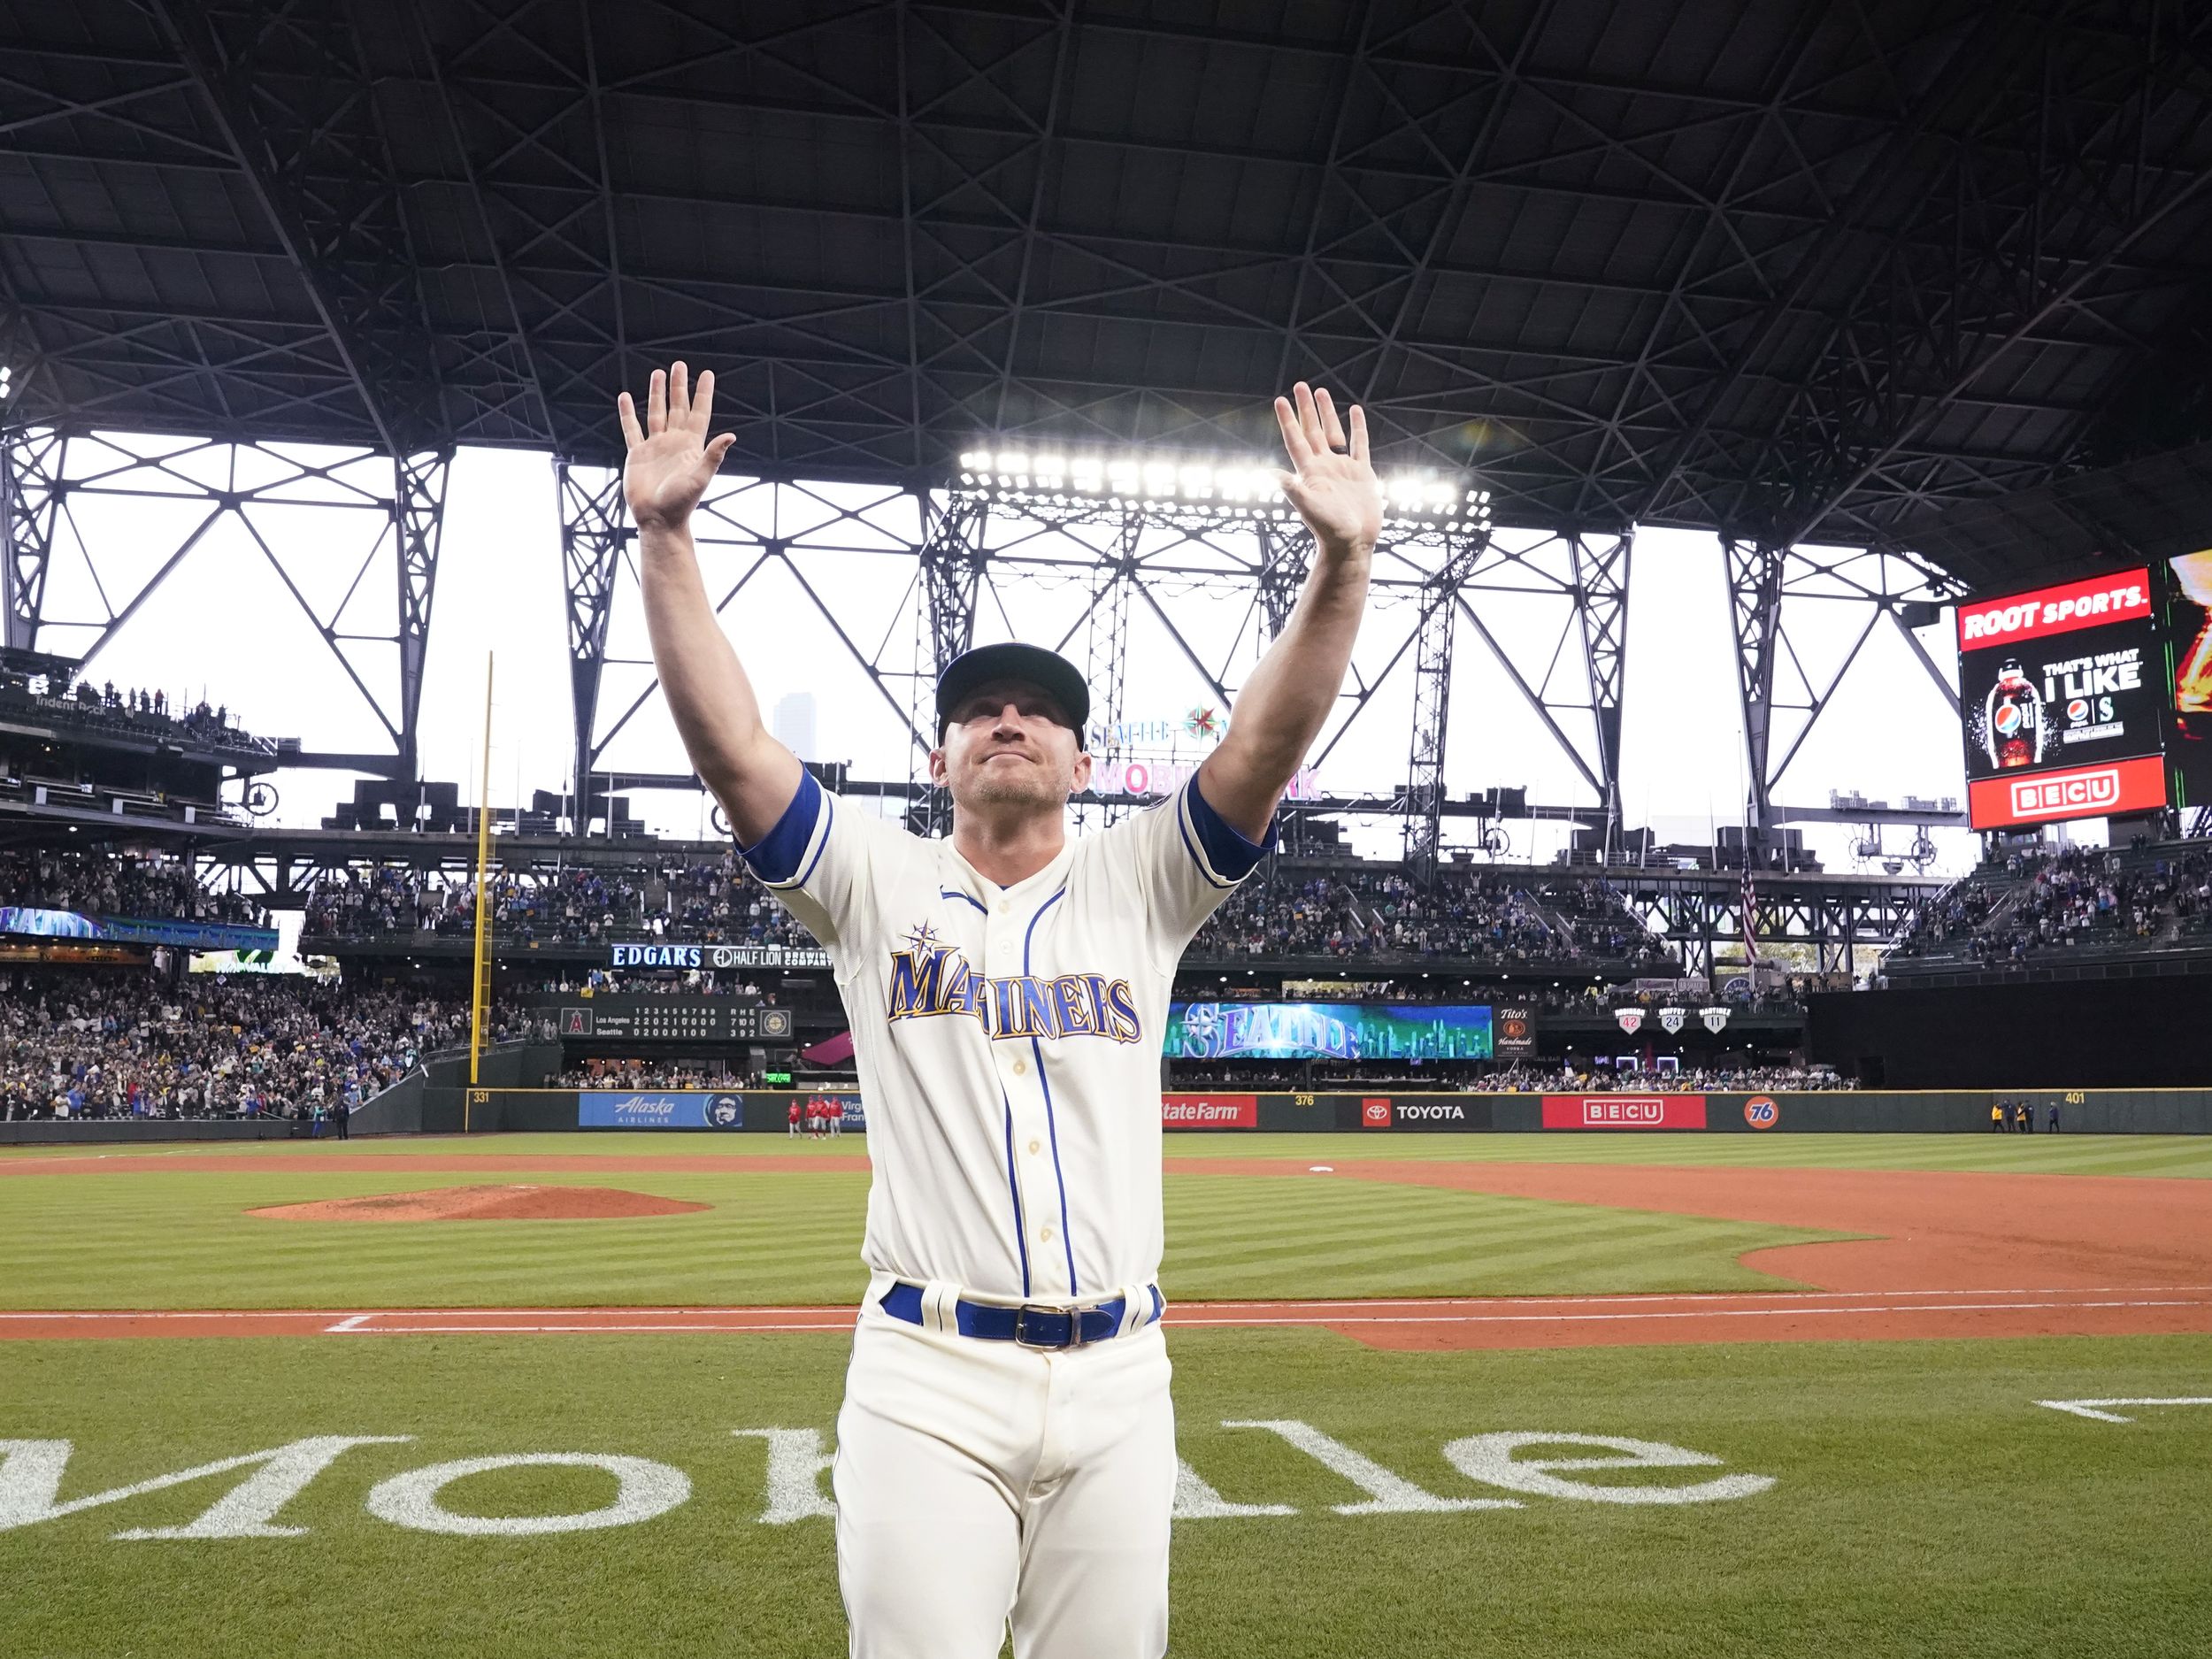 Sources: Mariners have declined 2022 option for longtime third